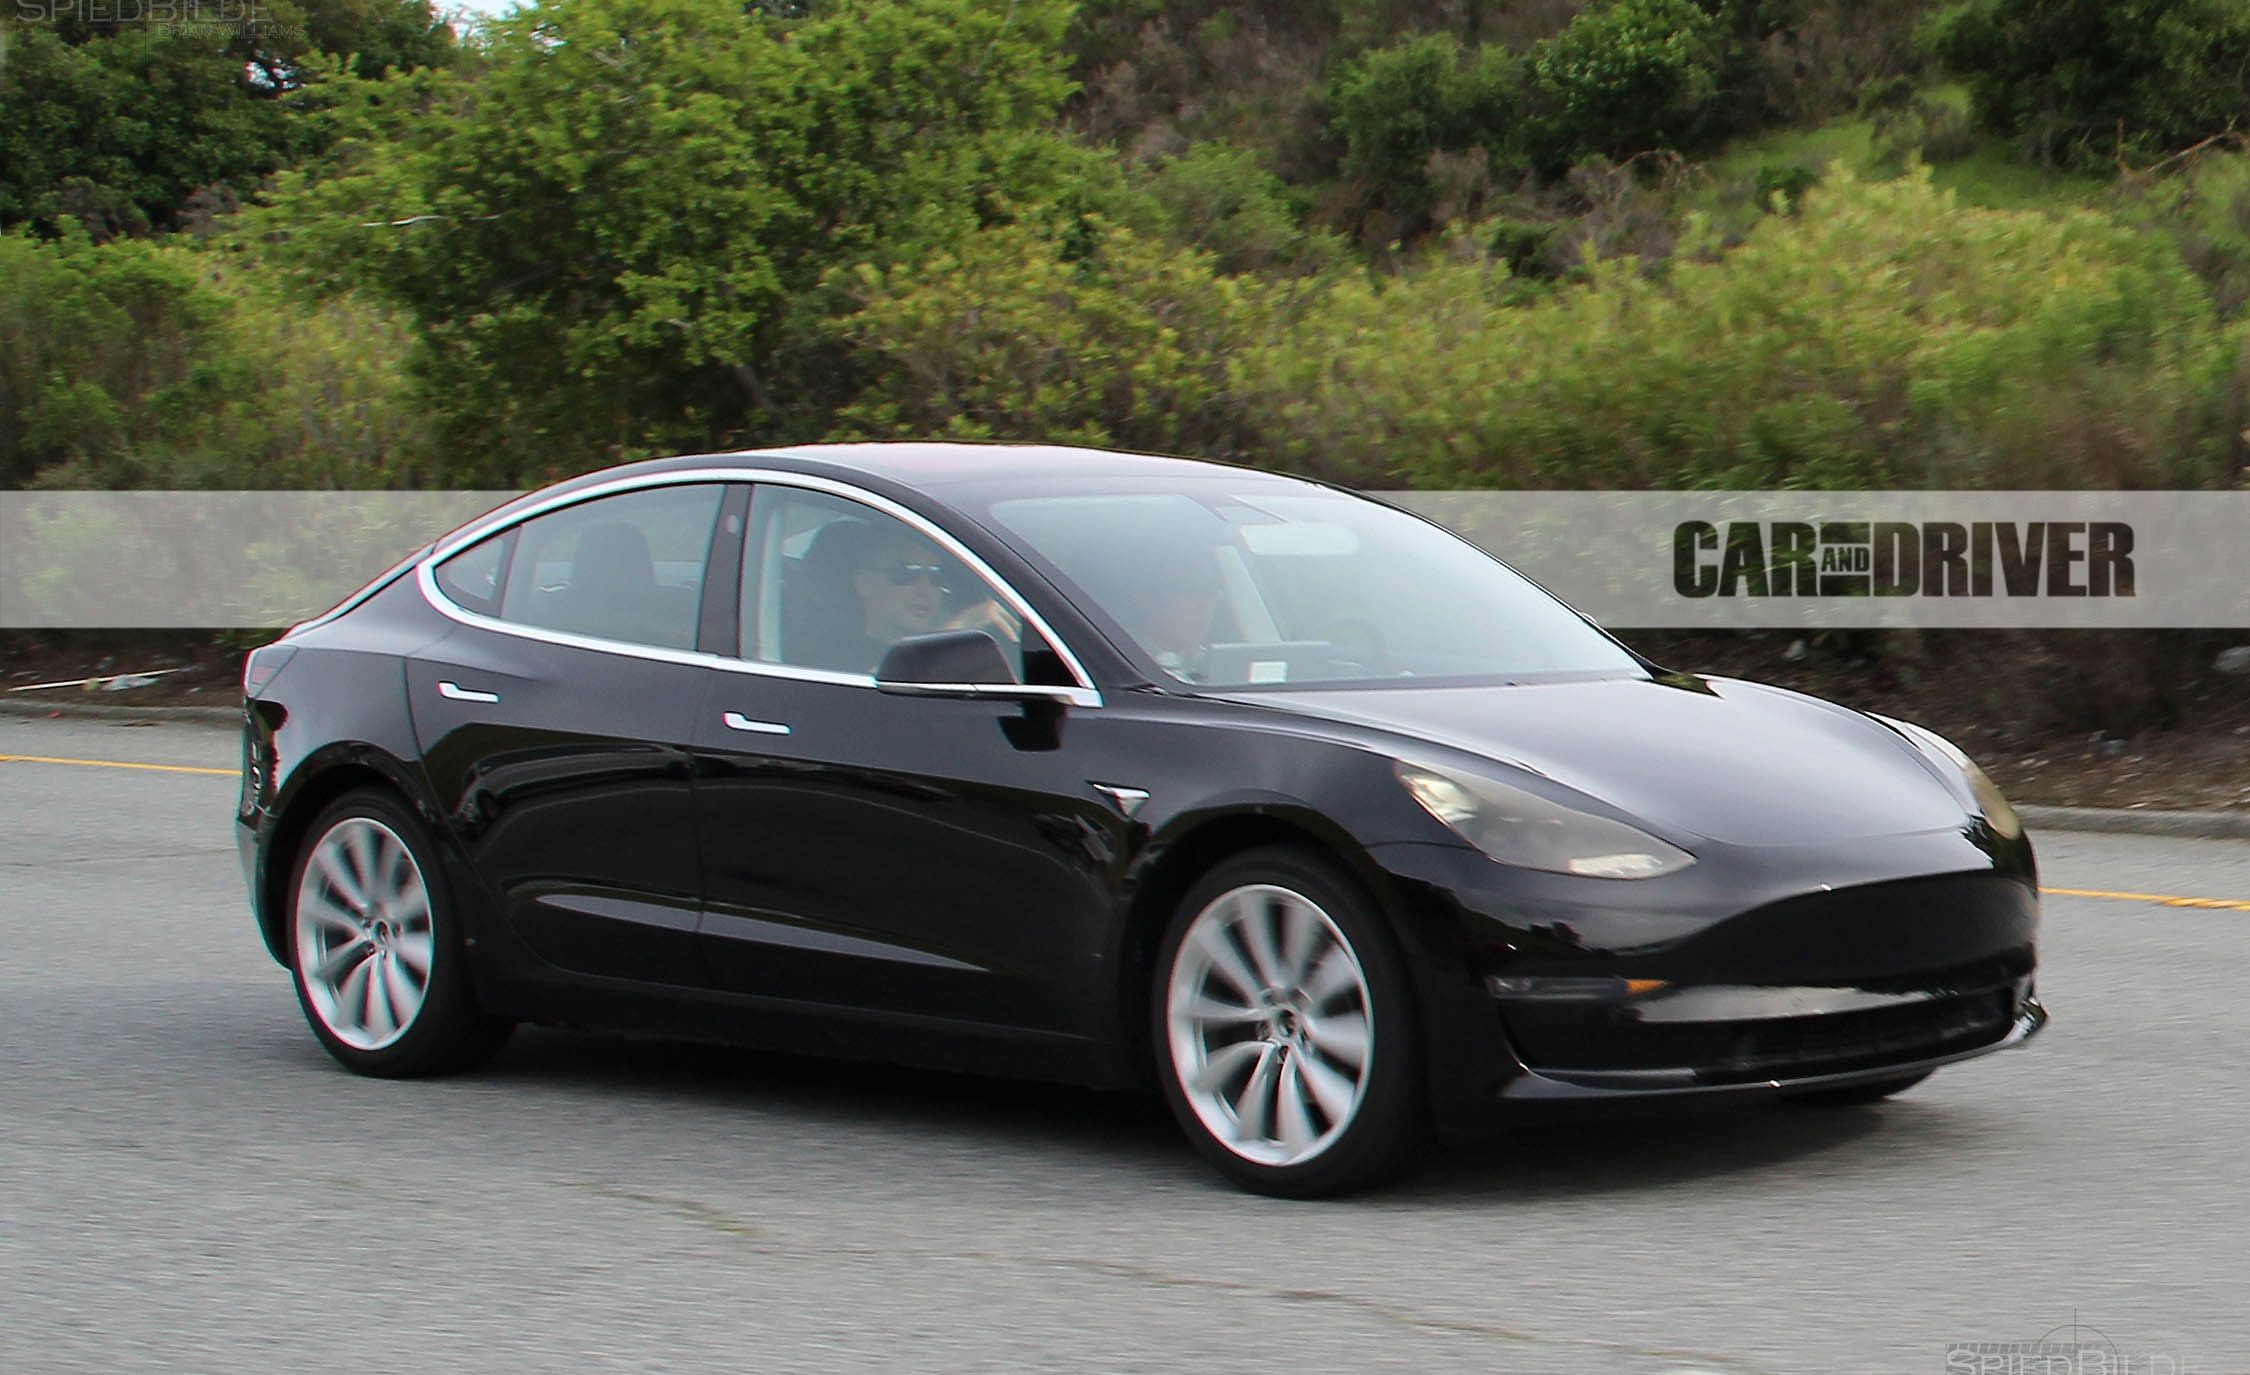 Spied: 2017 Tesla Model 3 Electric Vehicle | News | Car and Driver